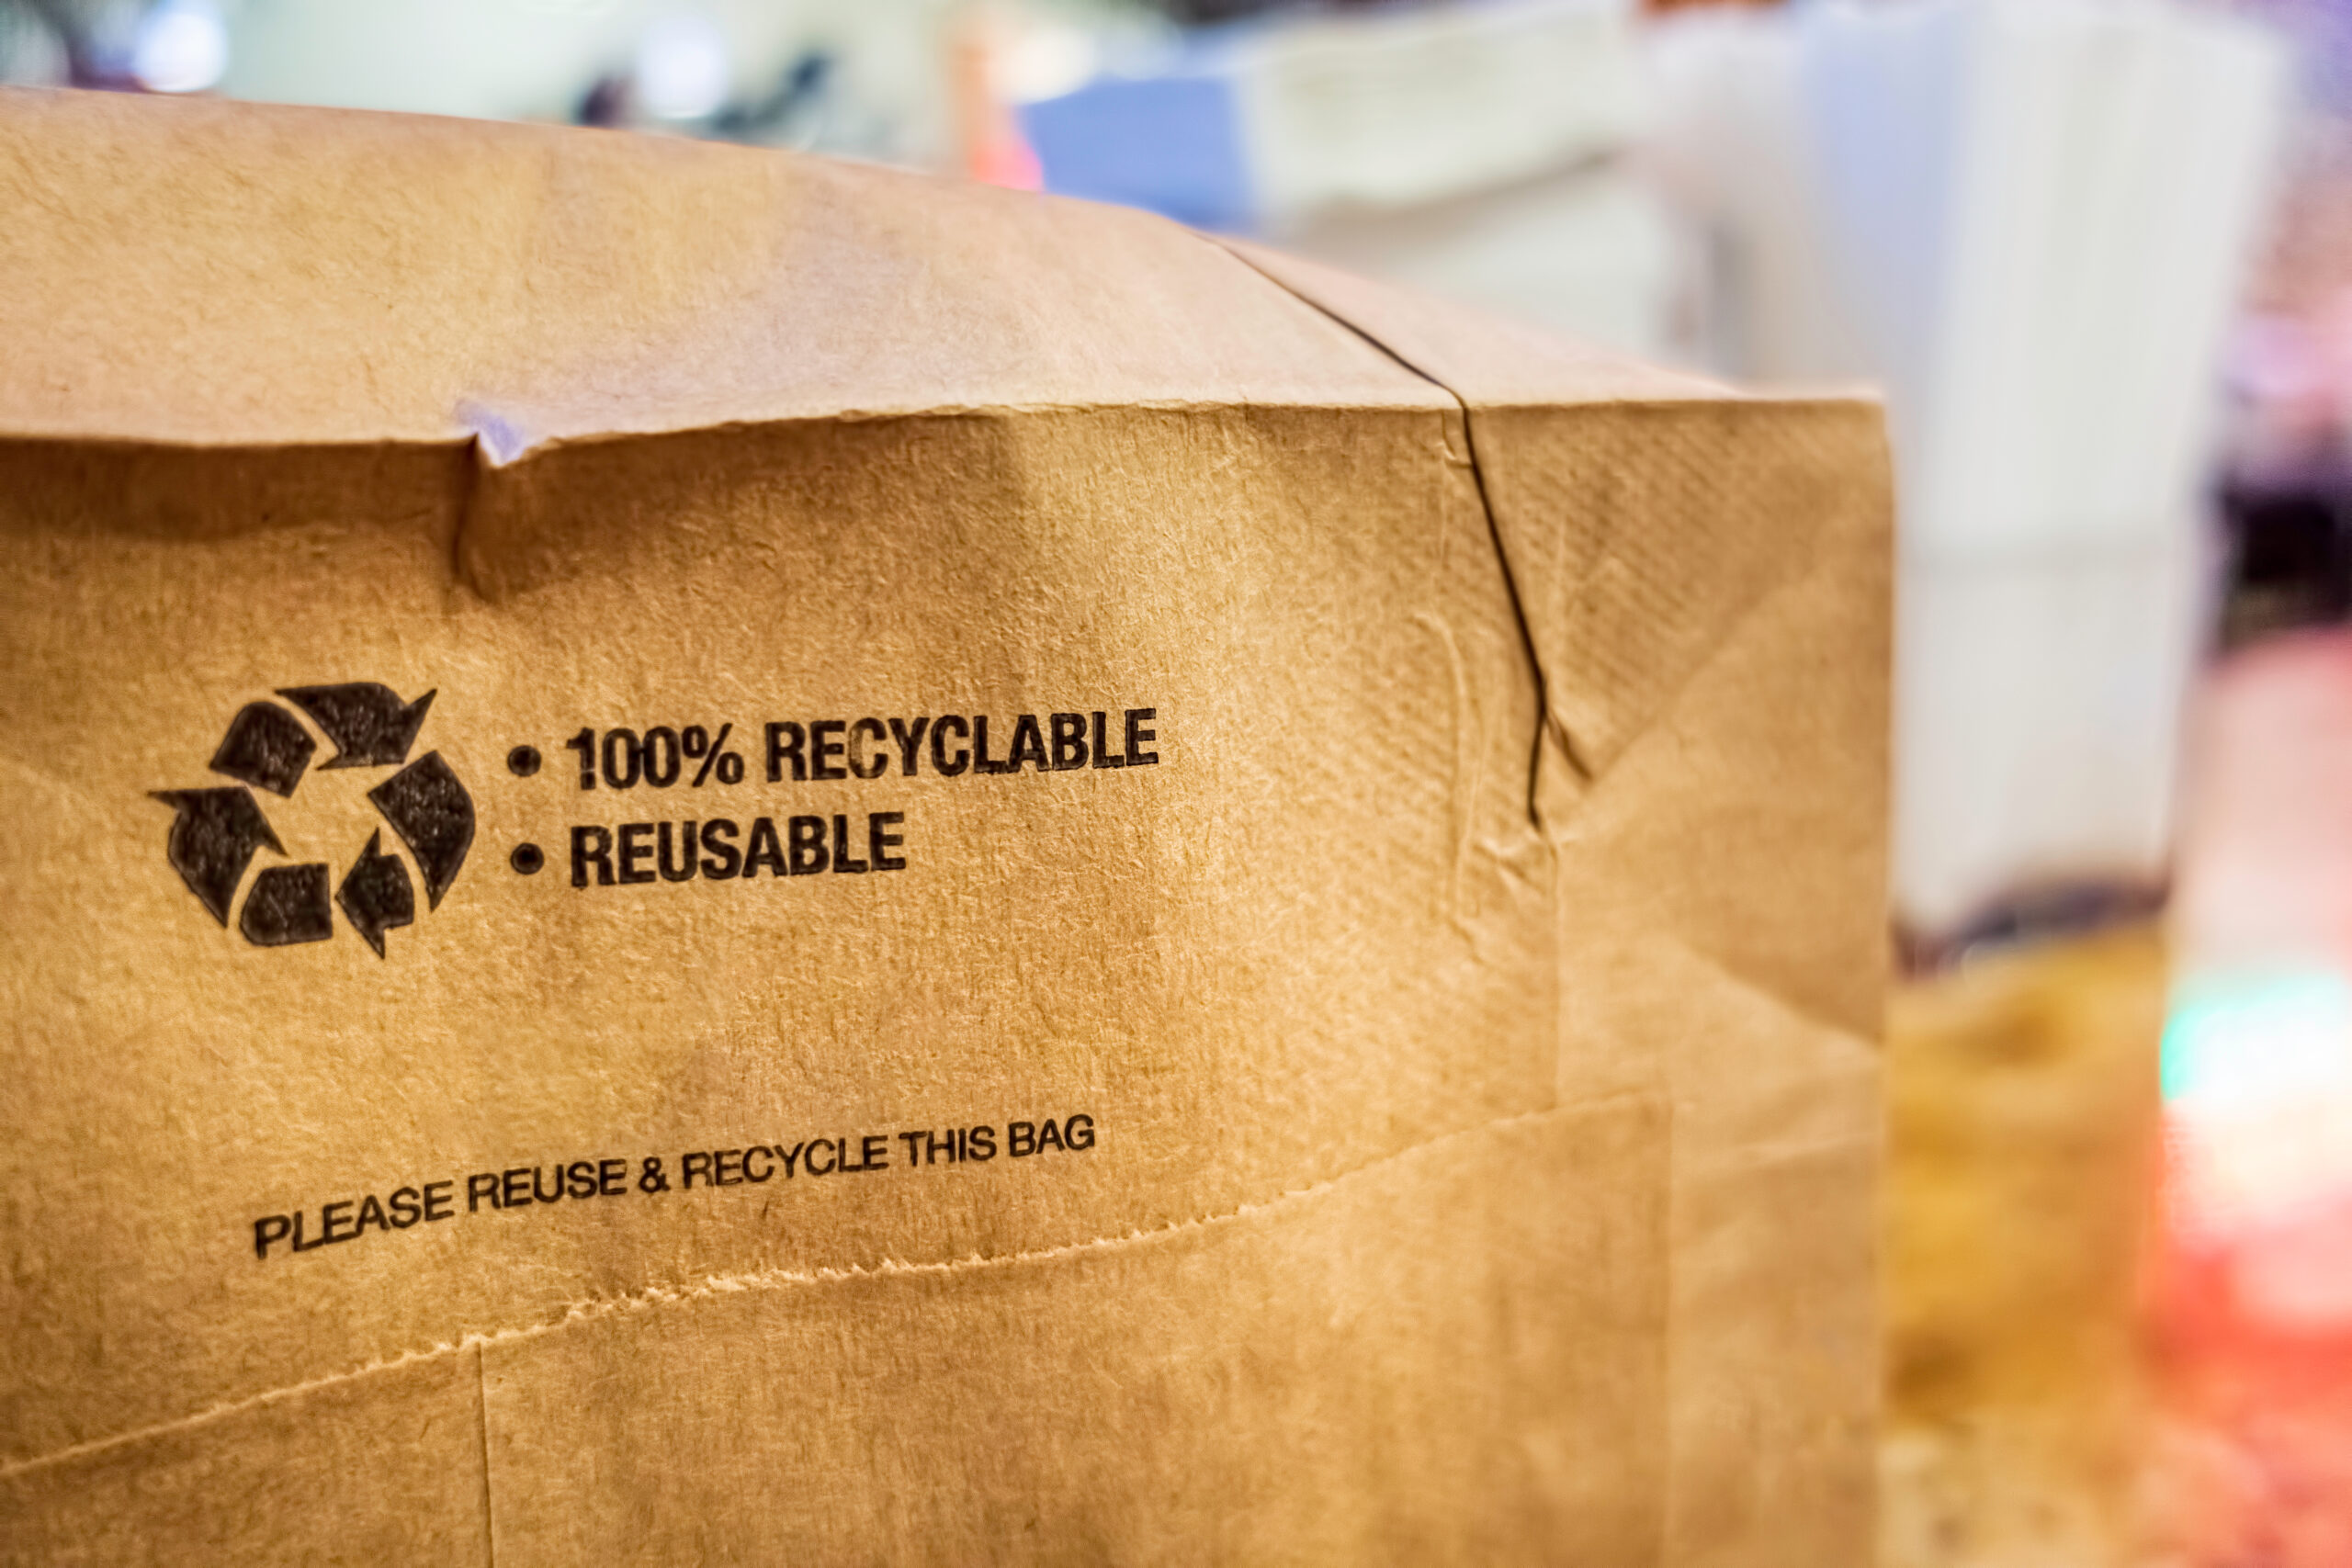 Brown,Paper,Bag,That,Is,100%,Recyclable,And,Reusable,On